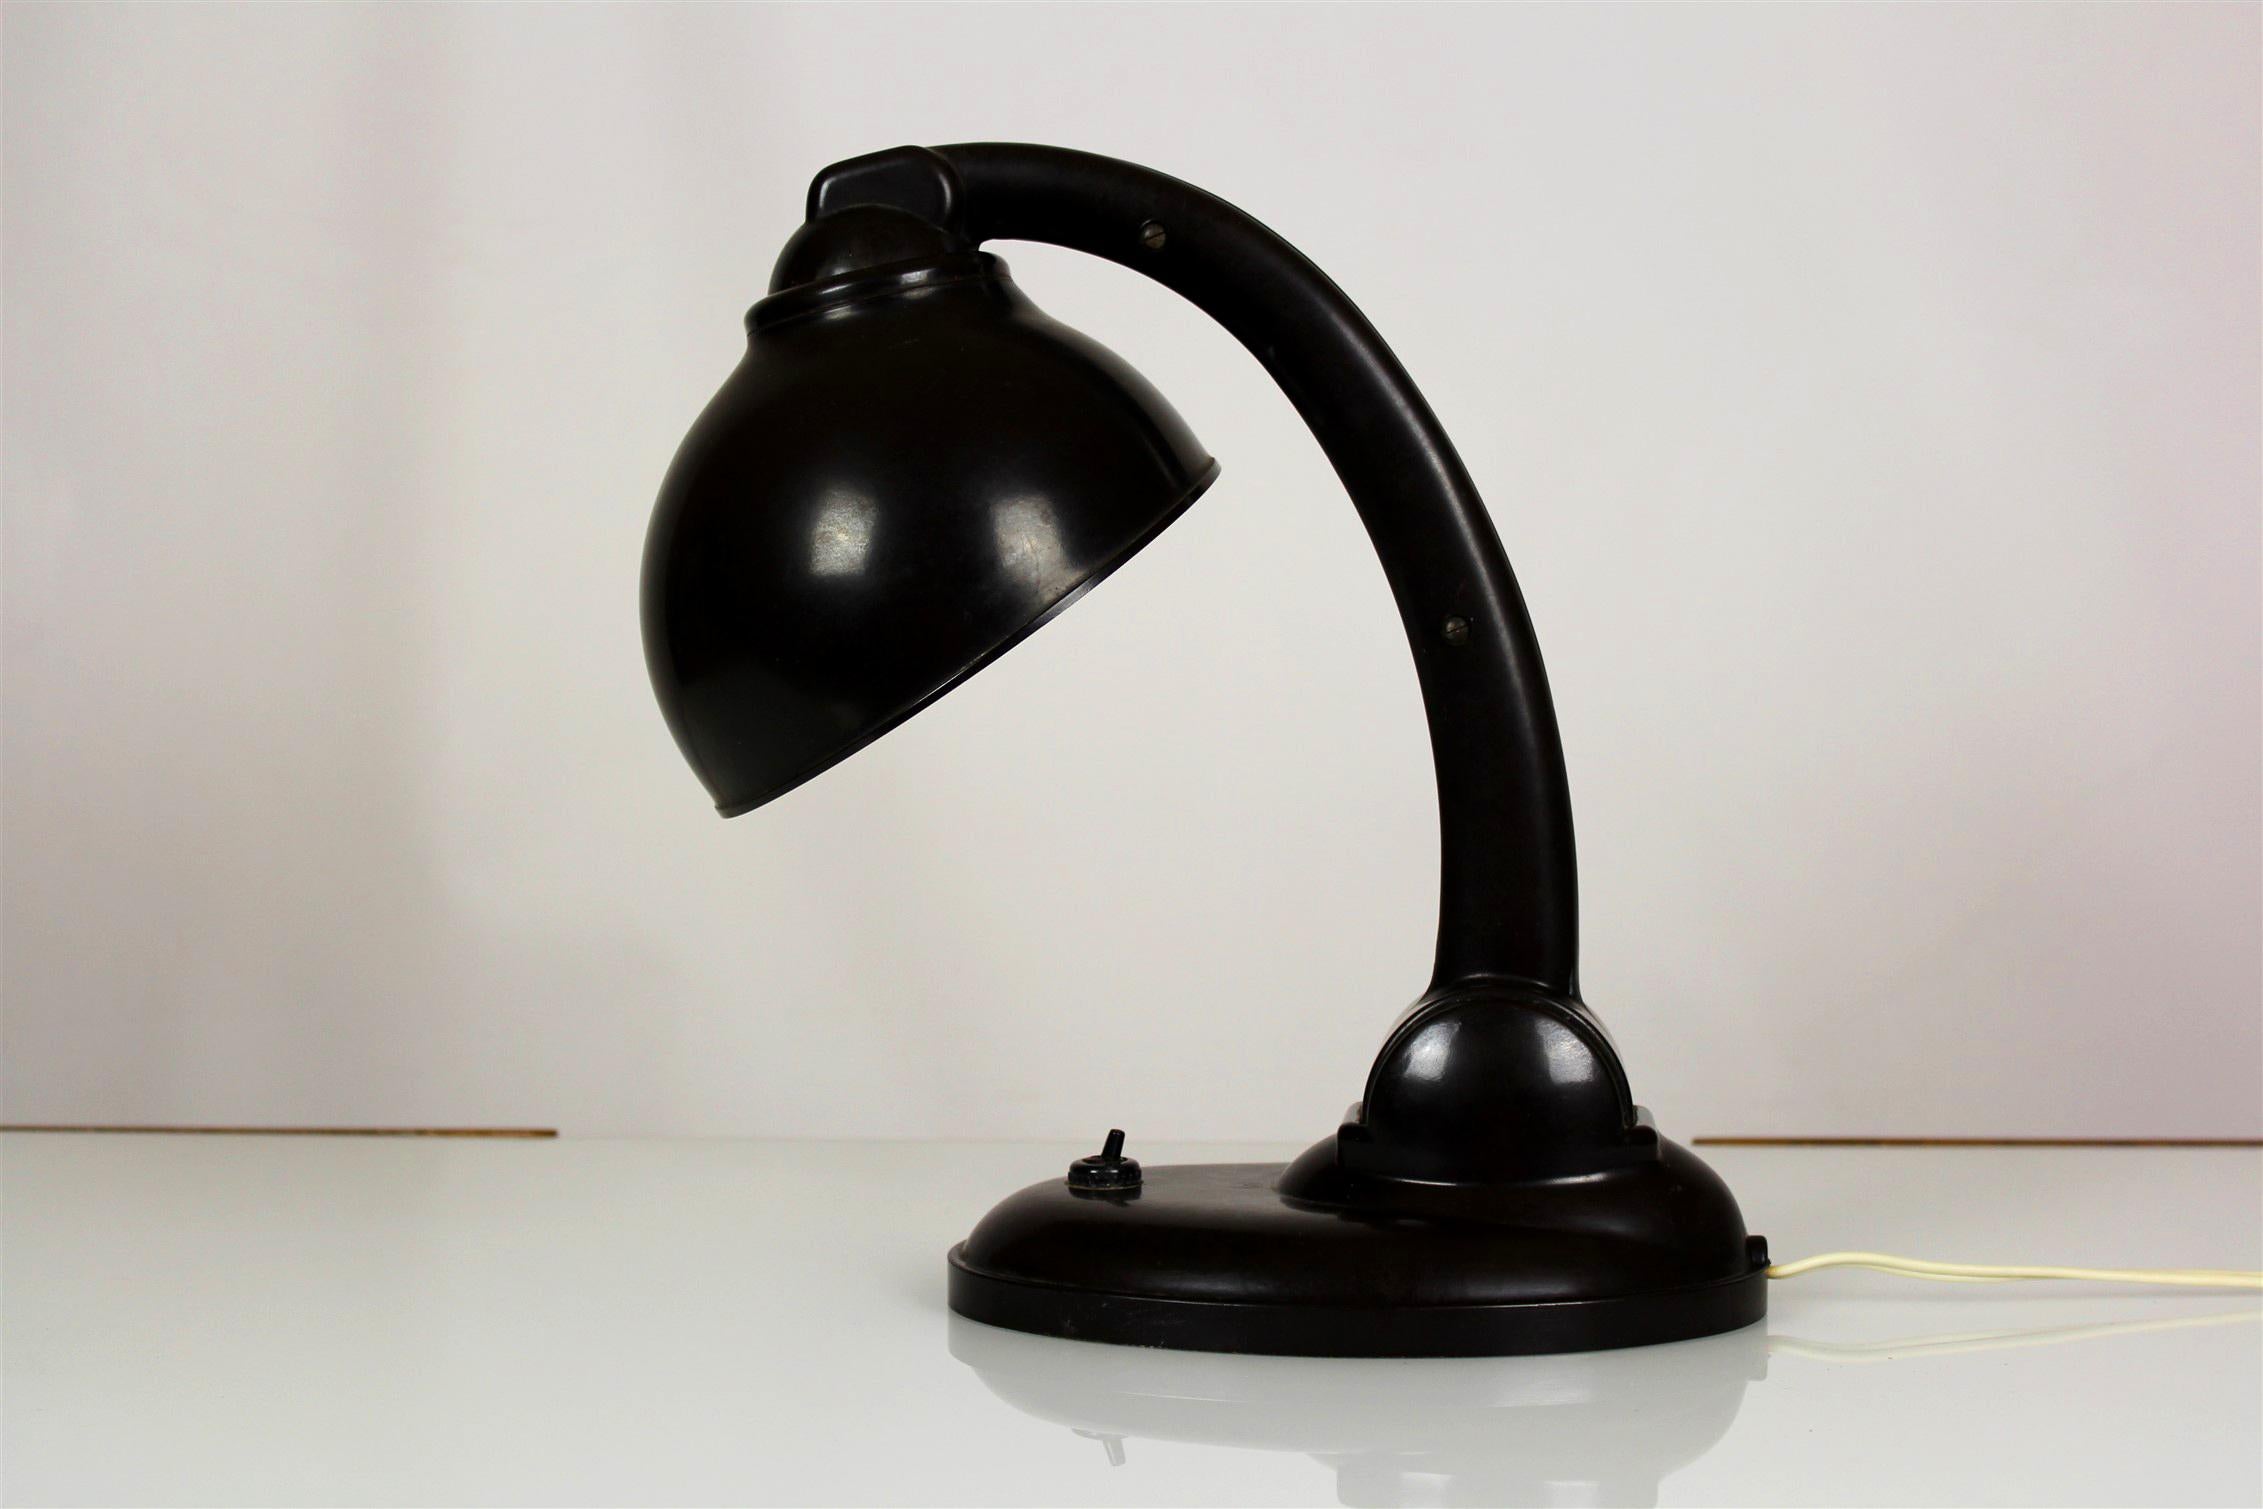 - Bakelite table lamp, model 11126 from the 1930s
- Designed by Eric Kirkman Cole
- Signed, visible manufacturer’s mark
- Adjustable lampshade and the inclination of the arm
- The whole in its original state, was only cleaned
- The lamp is